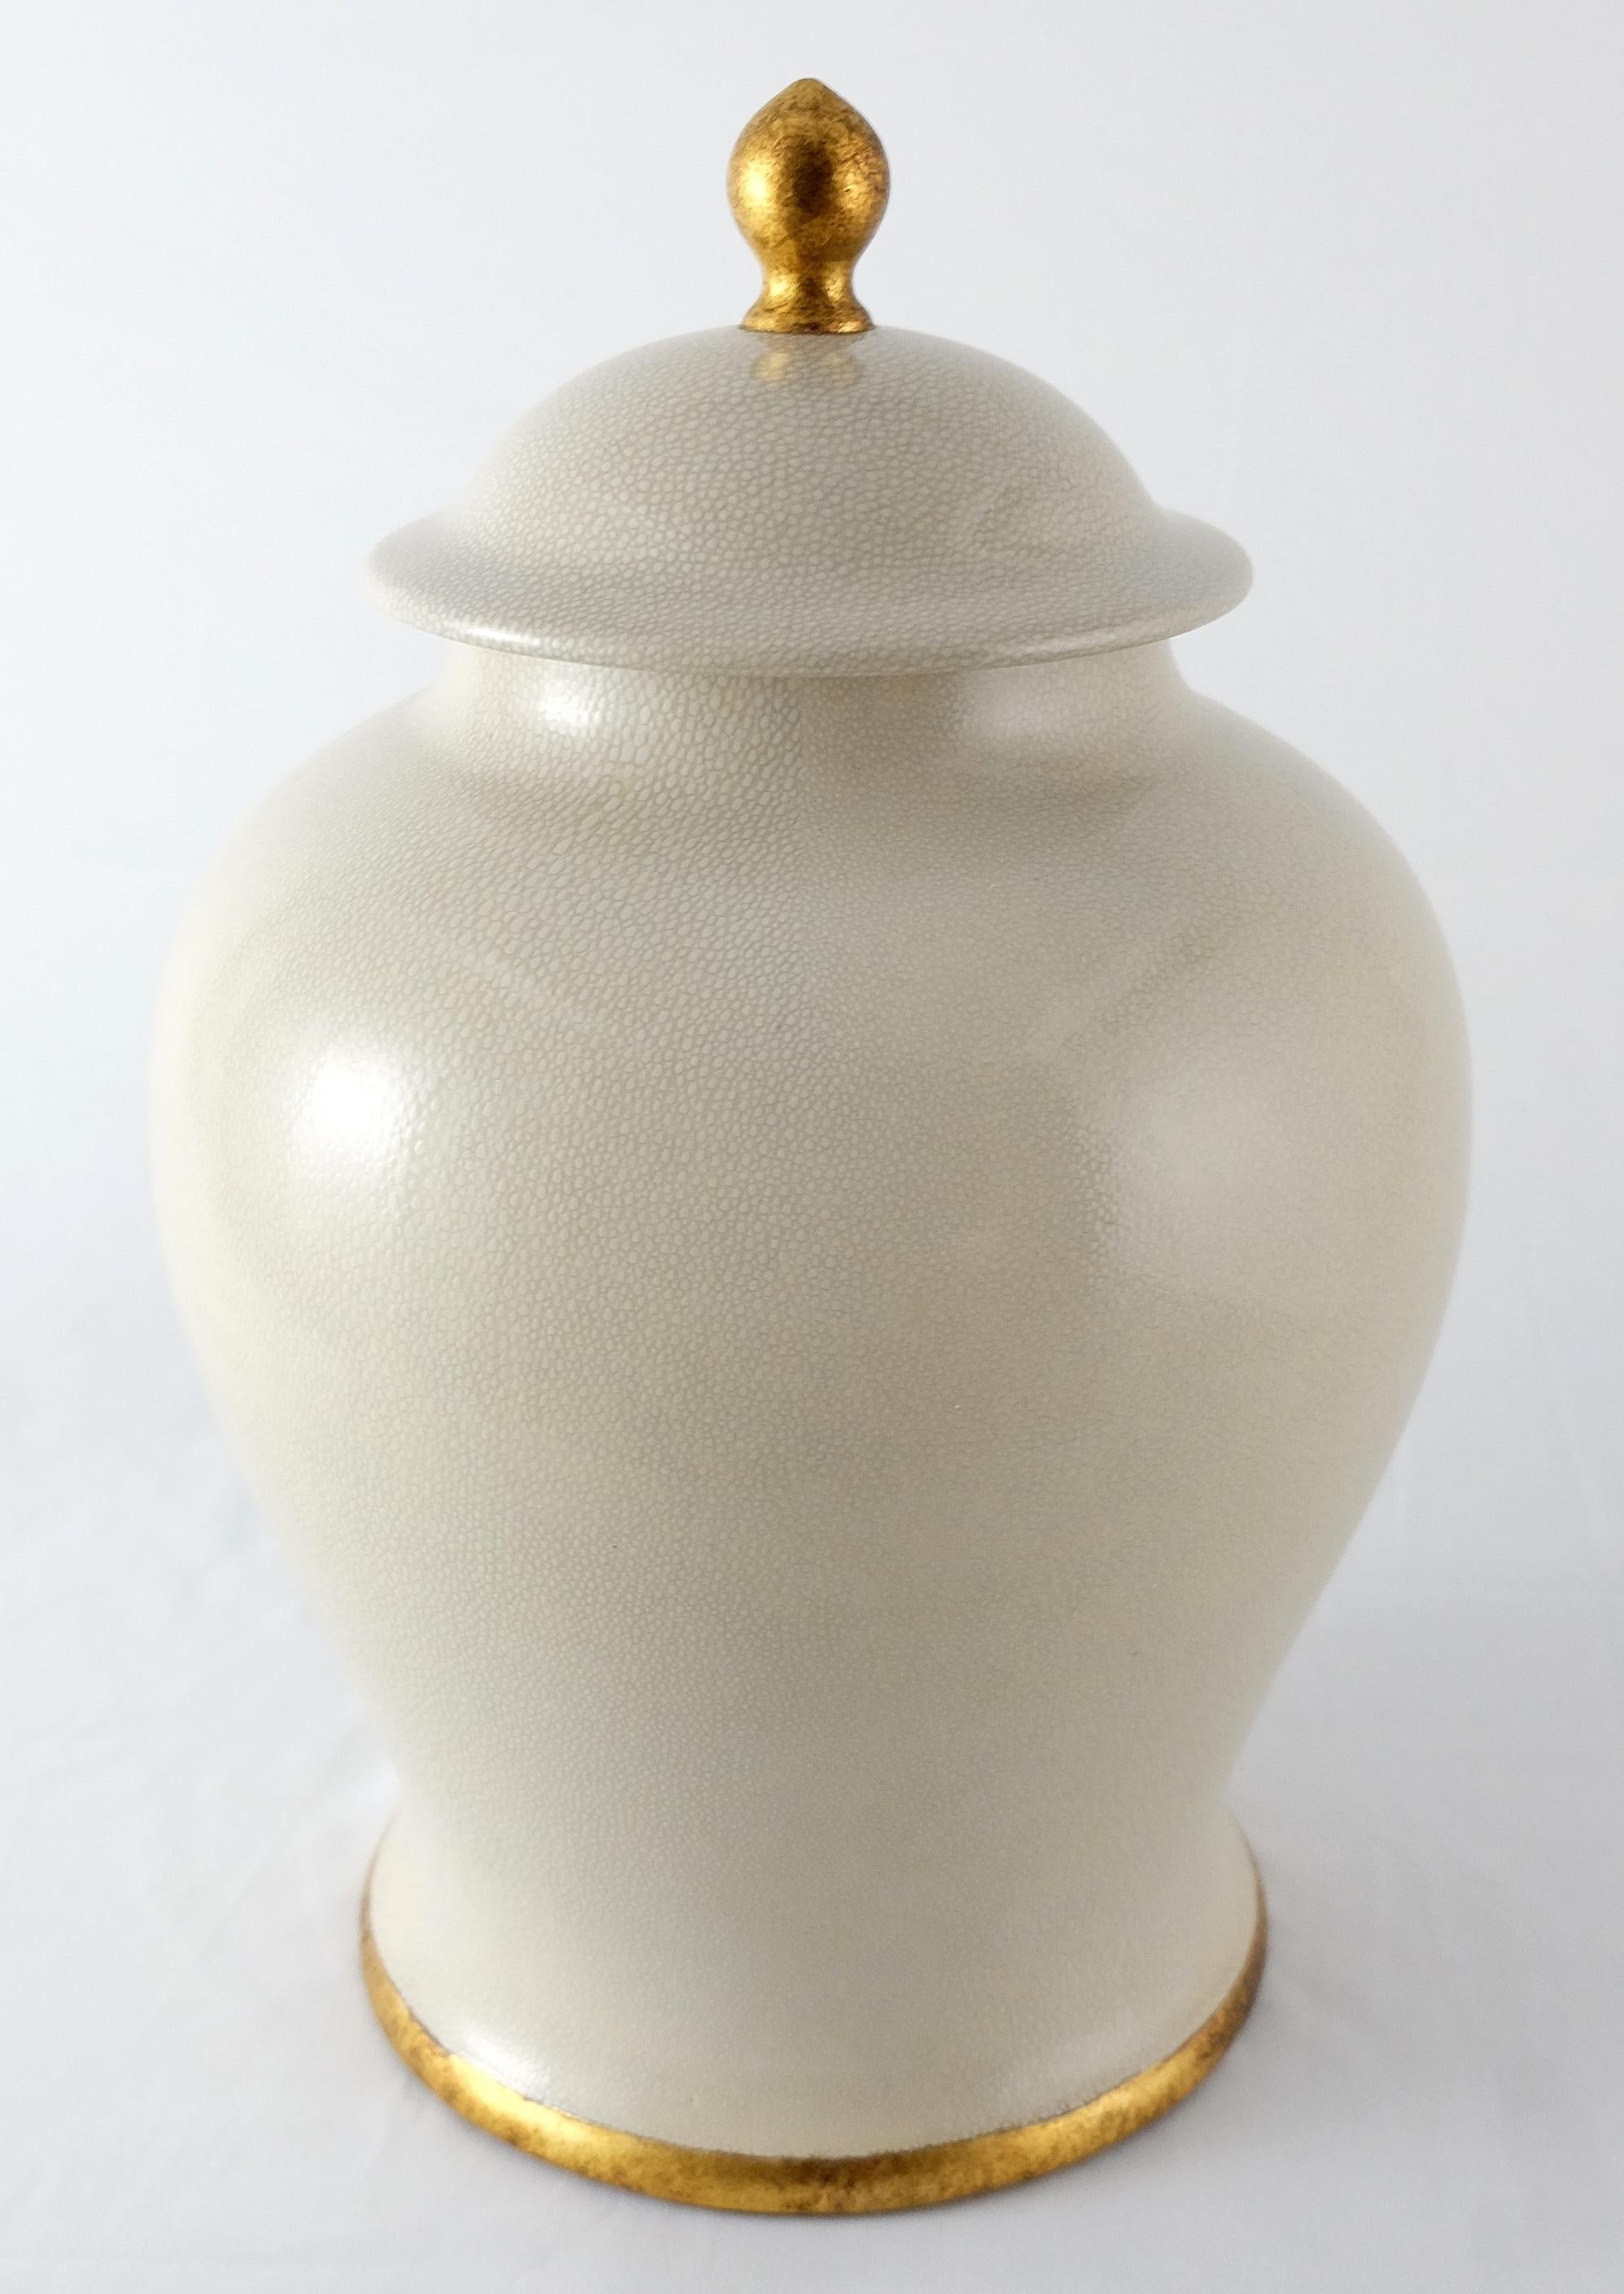 Paolo Marioni Italian Glazed Ceramic Jar with Gold-Leaf Accents 3